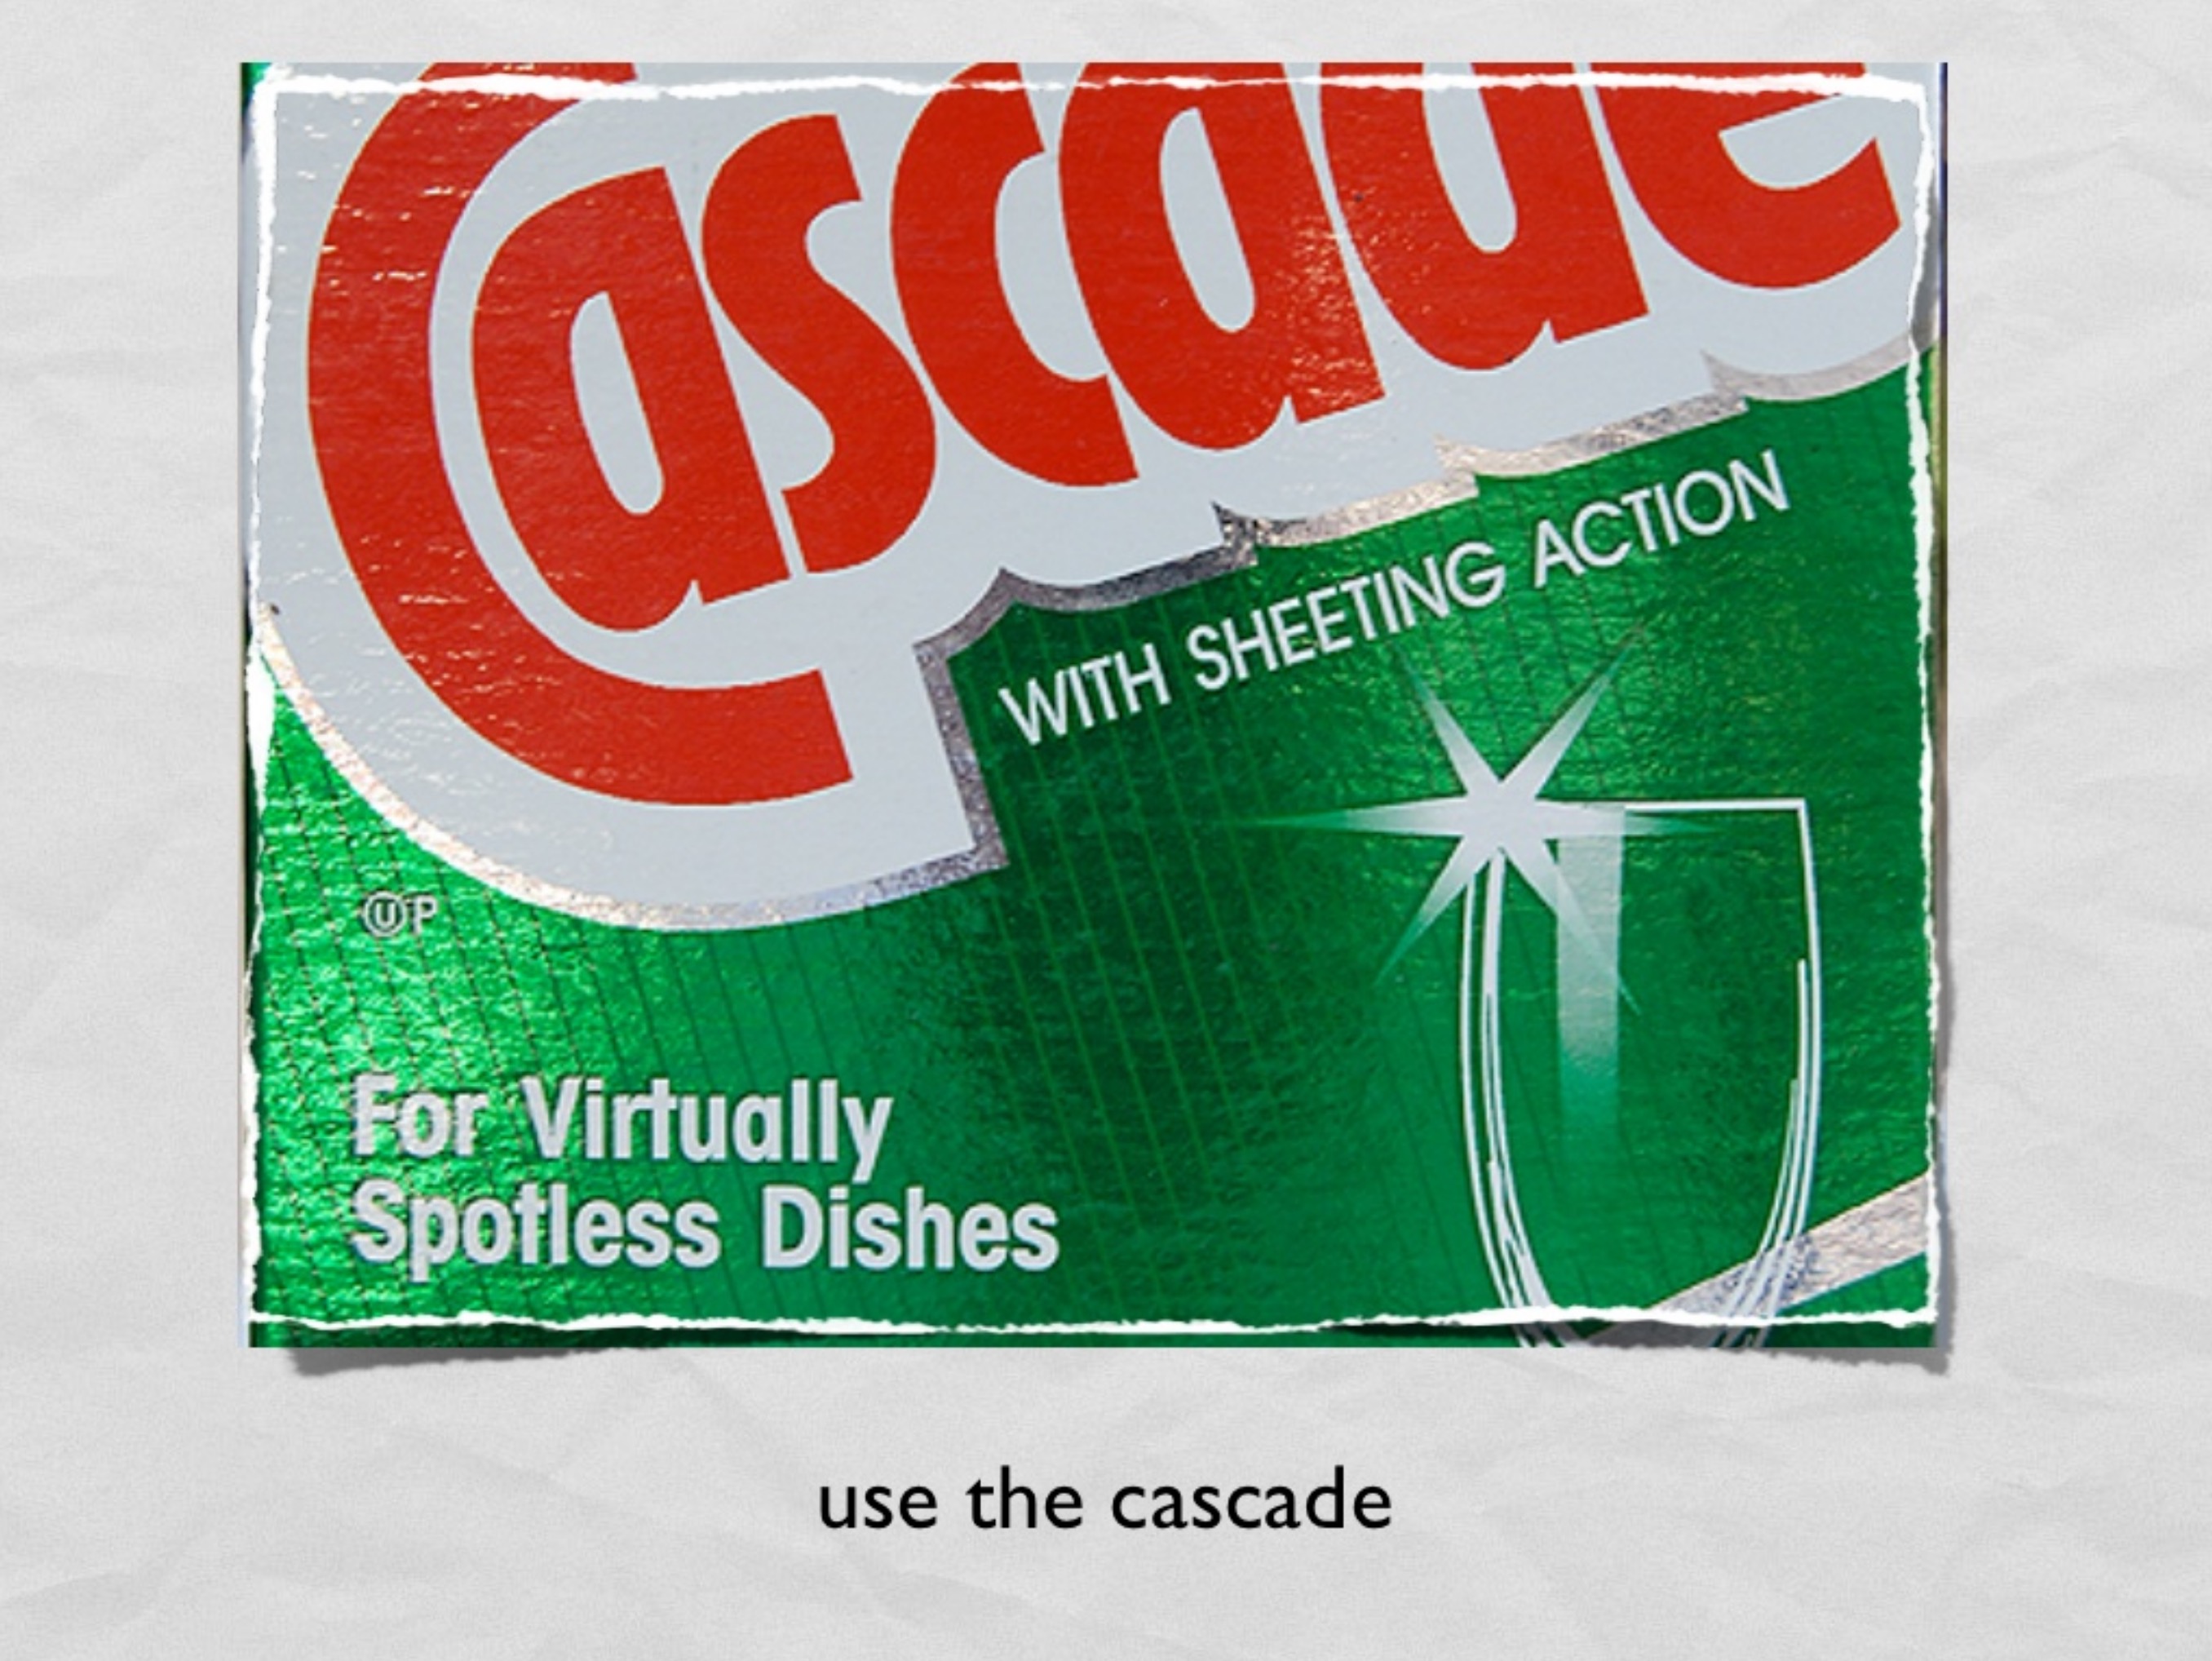 Product label for Cascade,
with sheeting action for virtually spotless dishes -
subtitled 'Use the Cascade'
